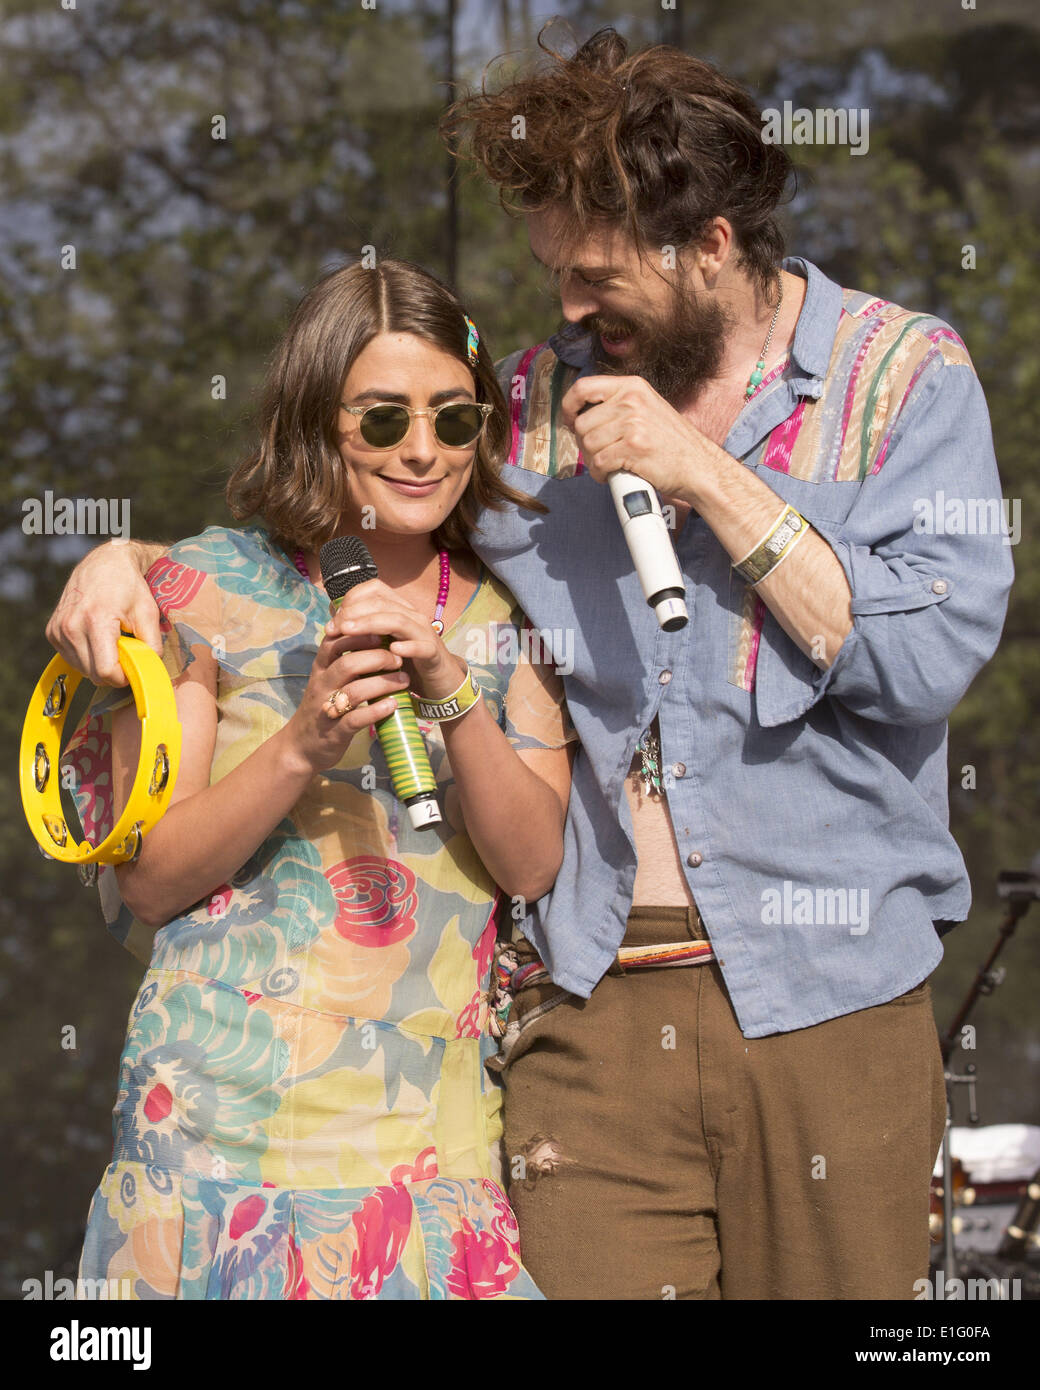 Napa, California, USA. 11th May, 2013. Vocalists JADE CASTRINOS and ALEX EBERT of Edward Sharpe and the Magnetic Zeros performs at BottleRock music festival in Napa, California © DeSlover/ZUMAPRESS.com/Alamy